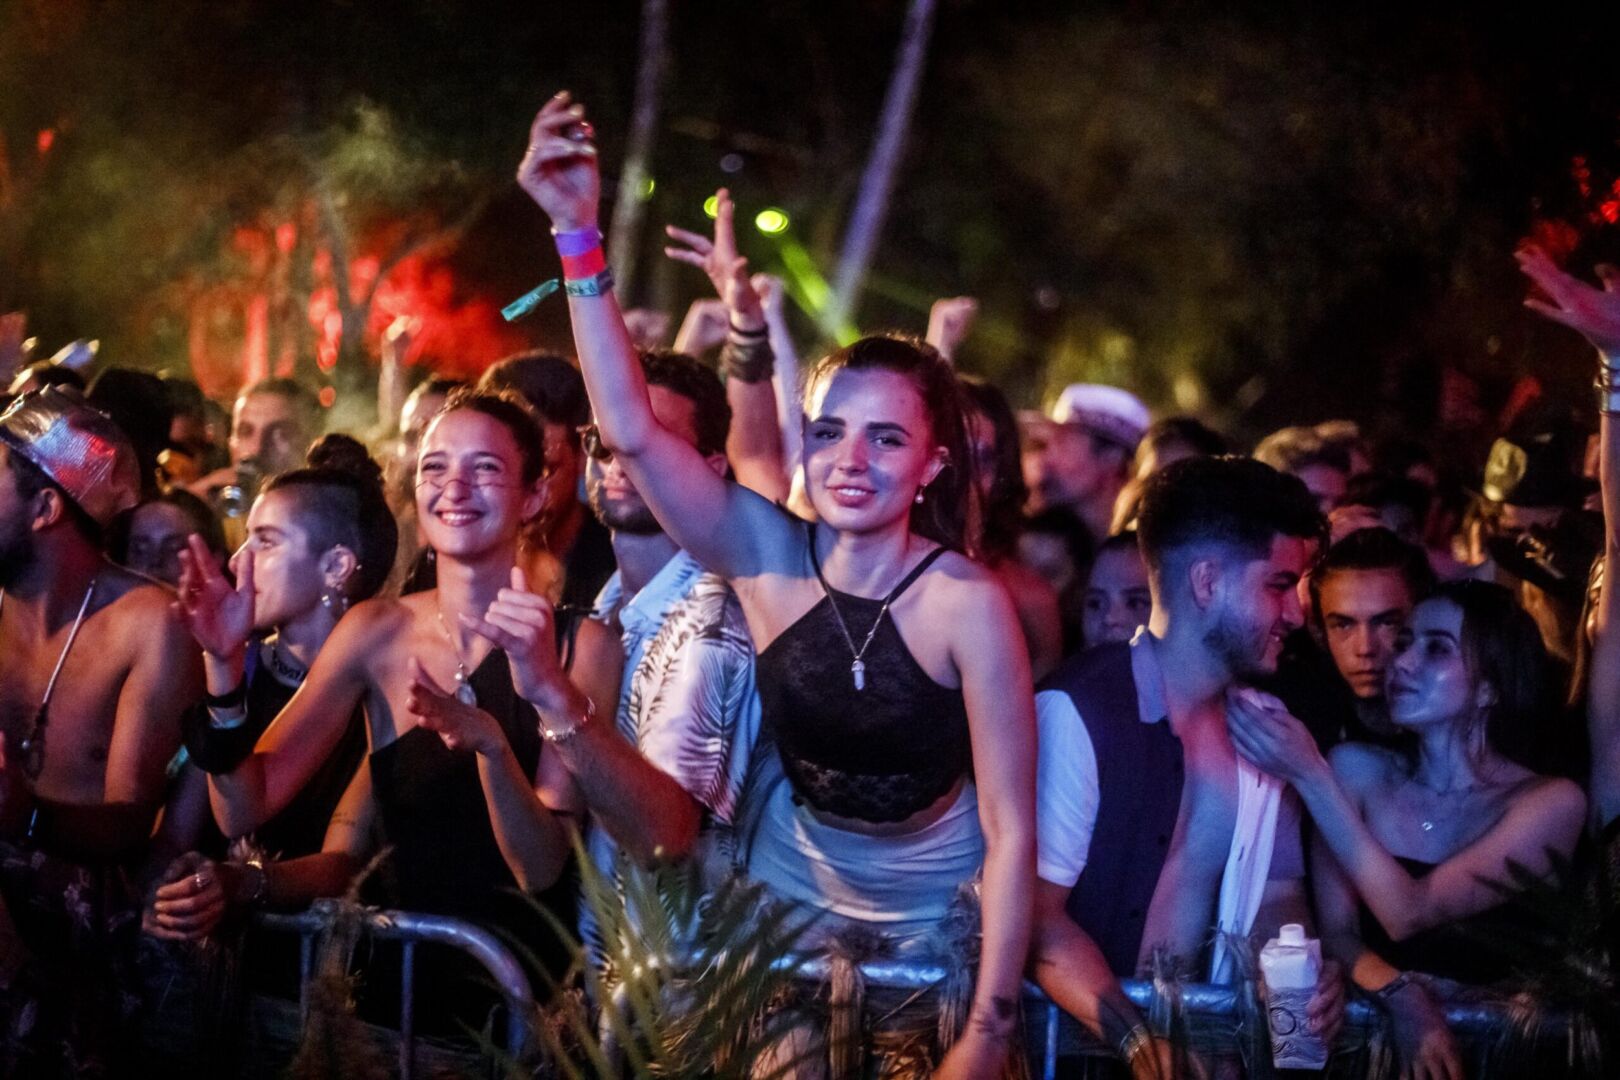 Festival Incident Sparks Safety Debate in Tulum